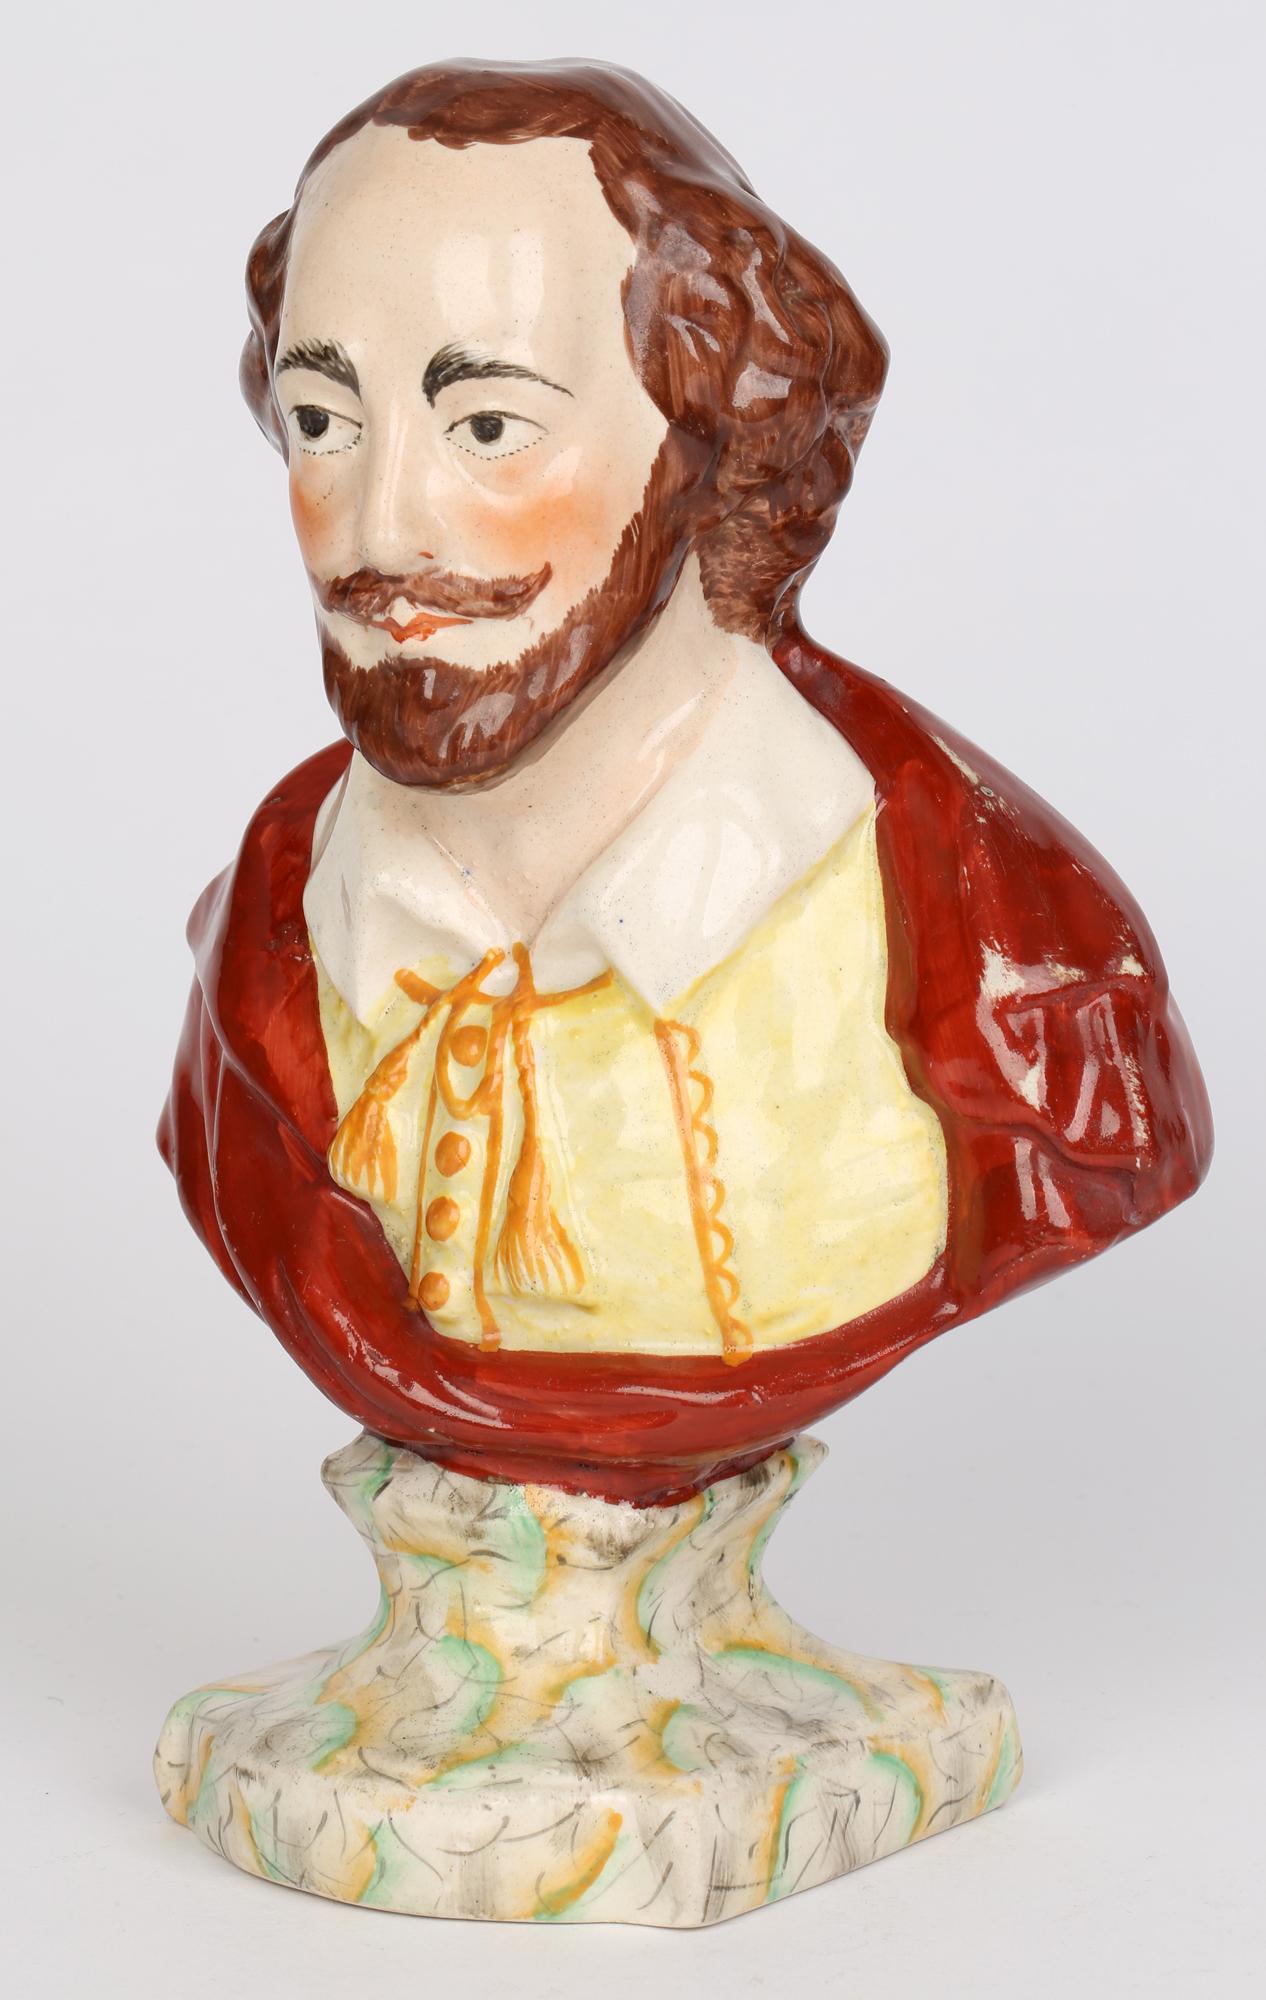 English, Probably Leeds Hand Painted Pottery Bust of William Shakespeare 2